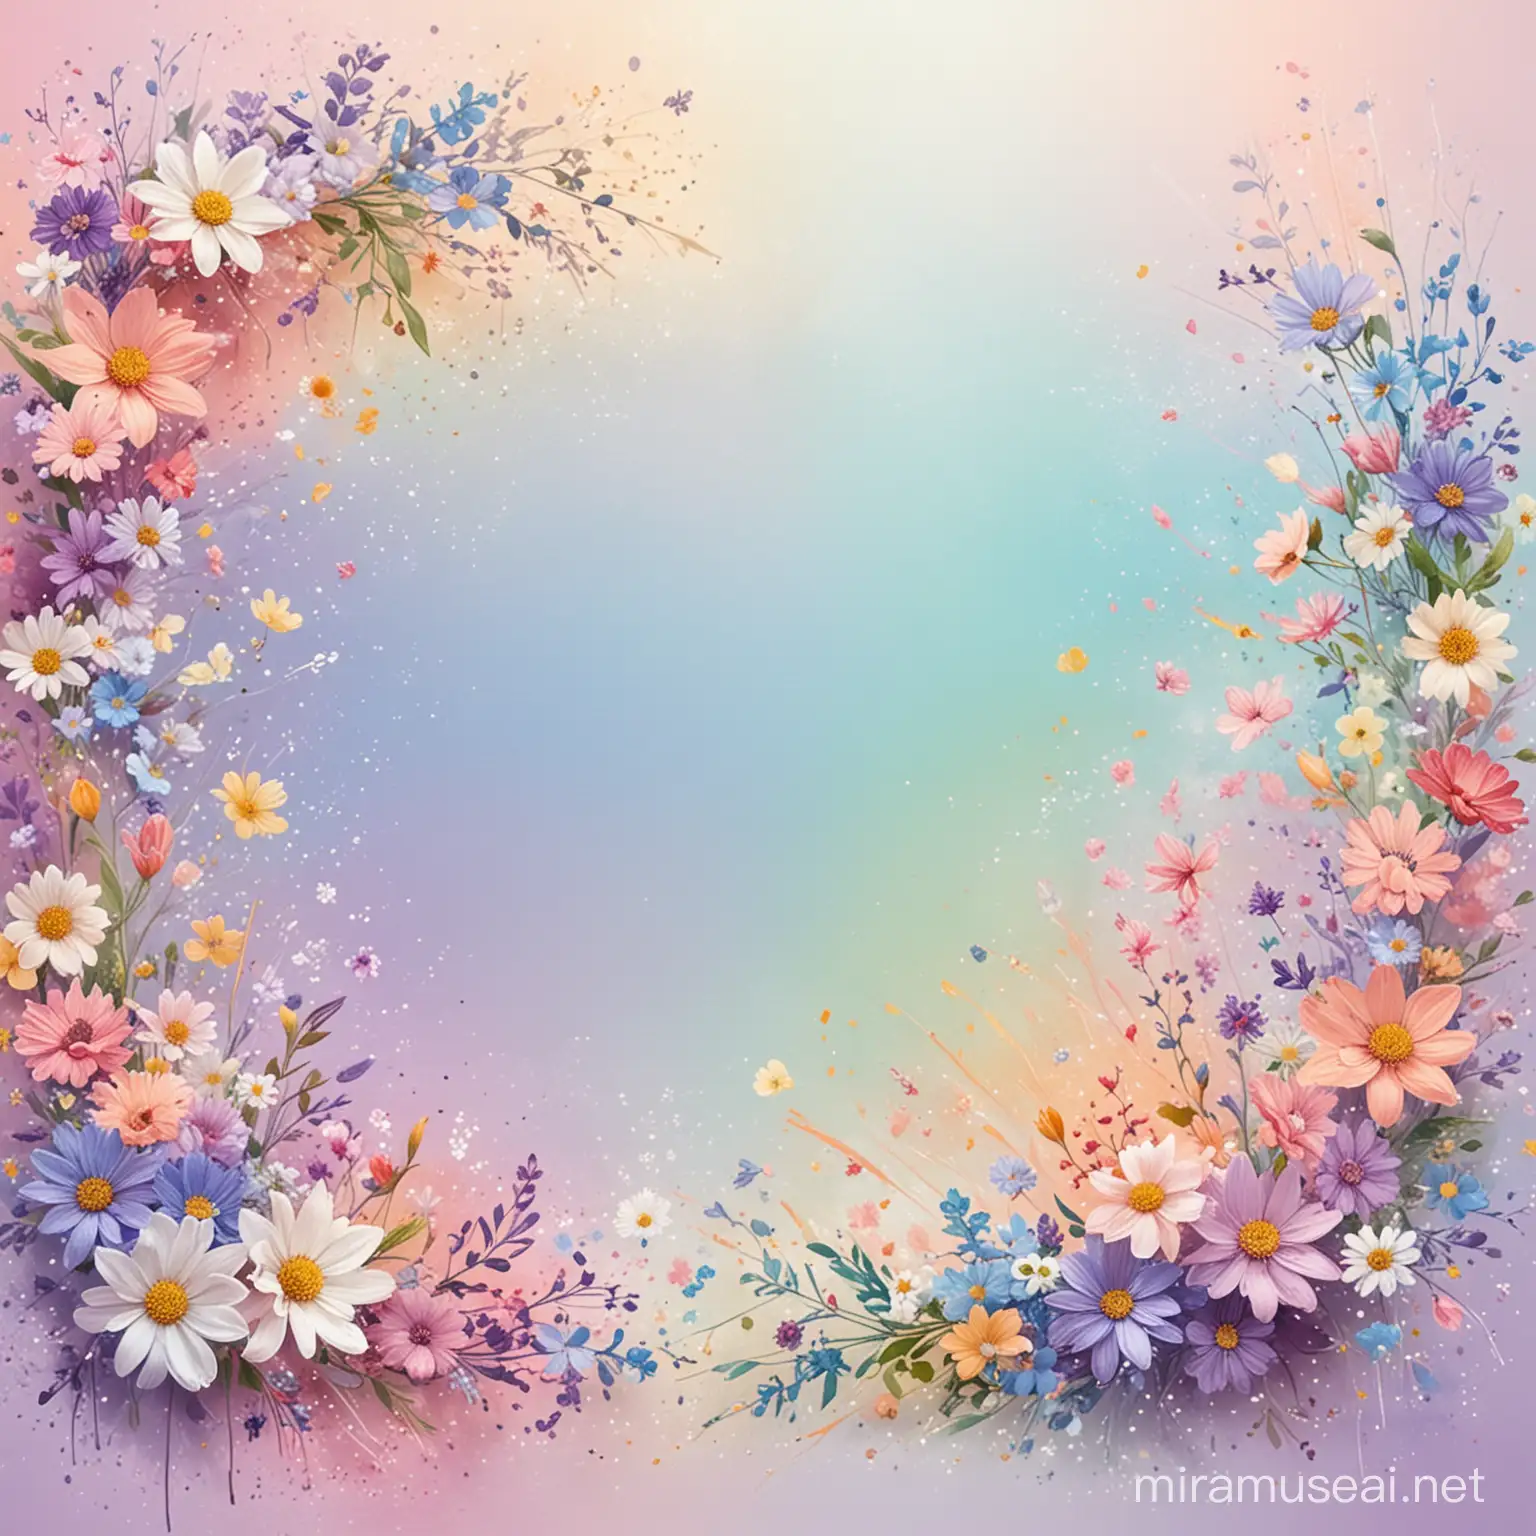 Pastel Floral Fantasy Soft Colorful Background with Scattered Flowers